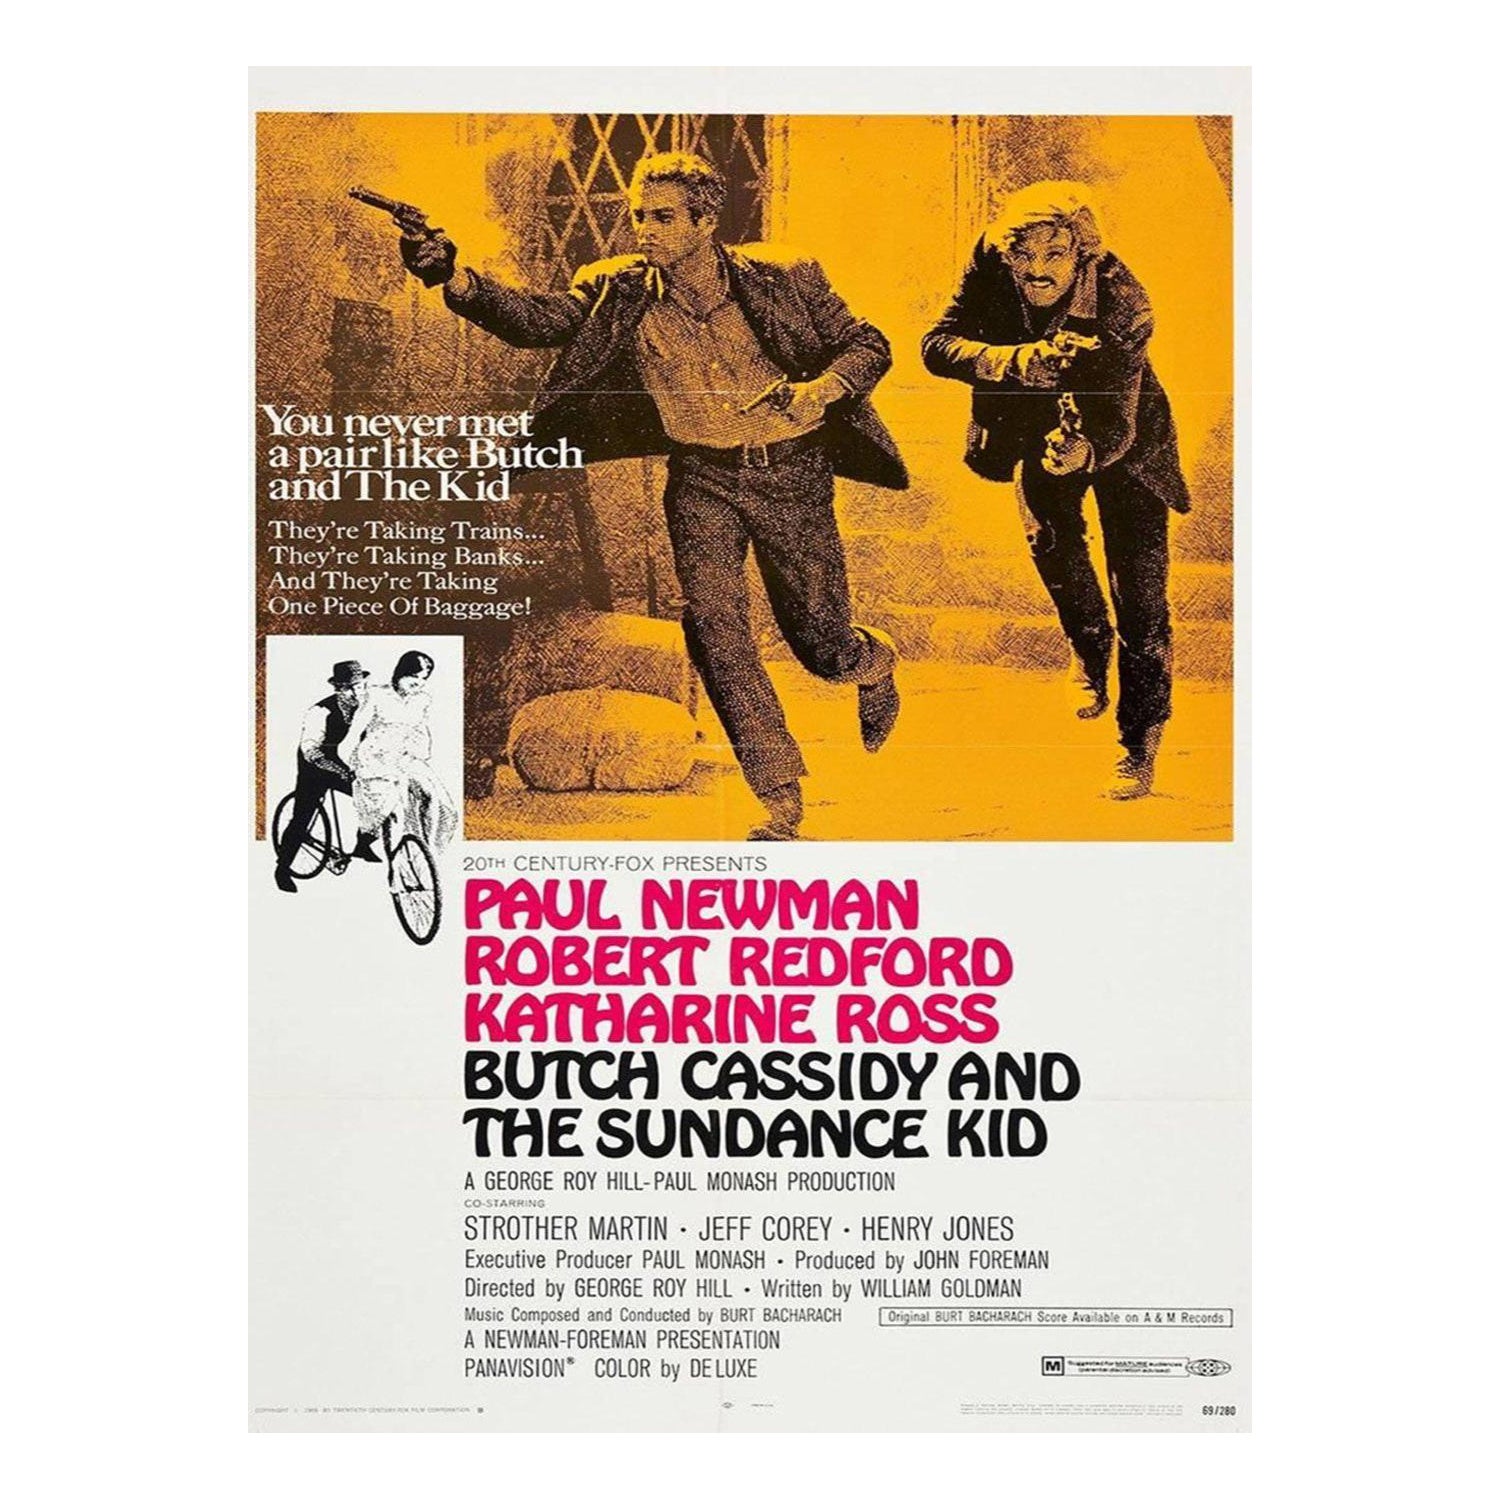 1969 Butch Cassidy and the Sundance Kid Original Vintage Poster For Sale